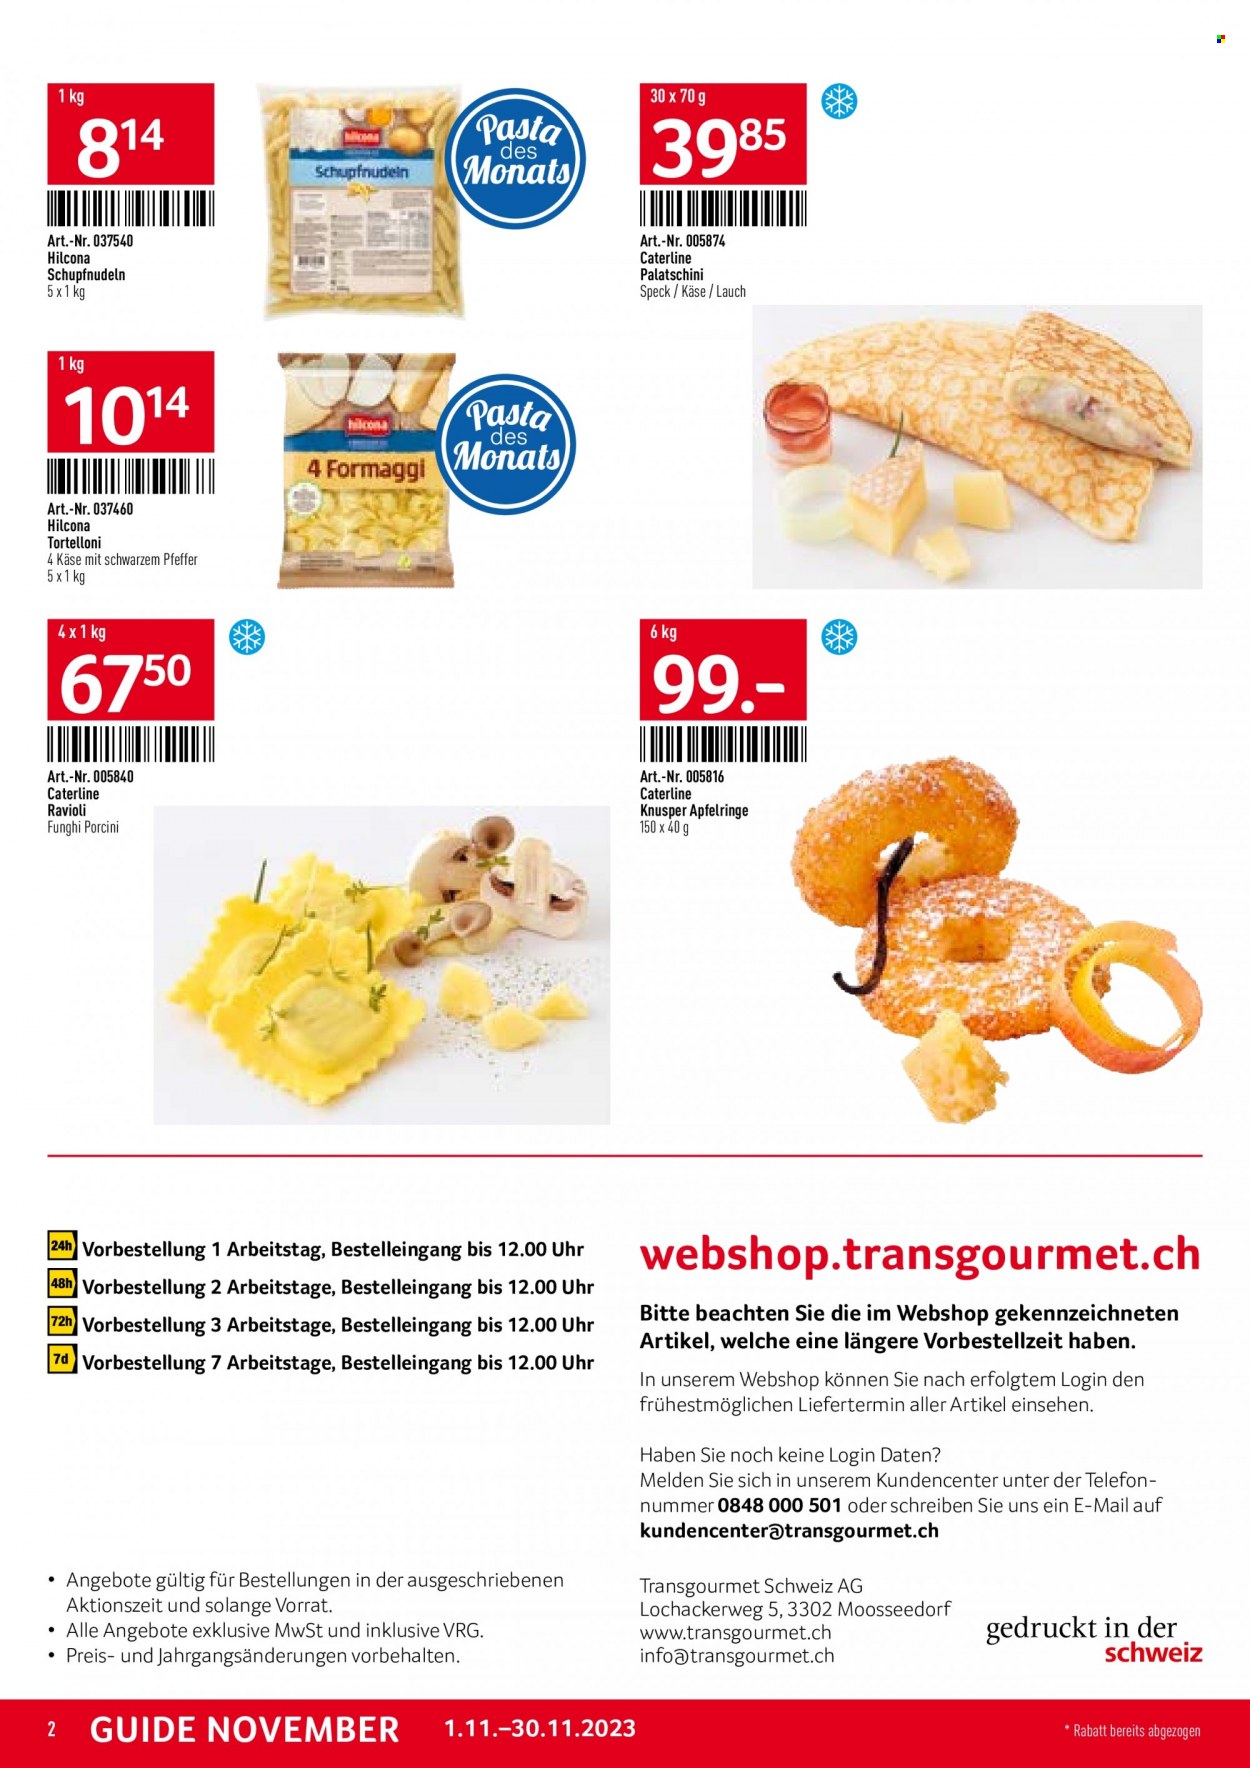 Catalogue TransGourmet - 1.11.2023 - 30.11.2023. Page 2.